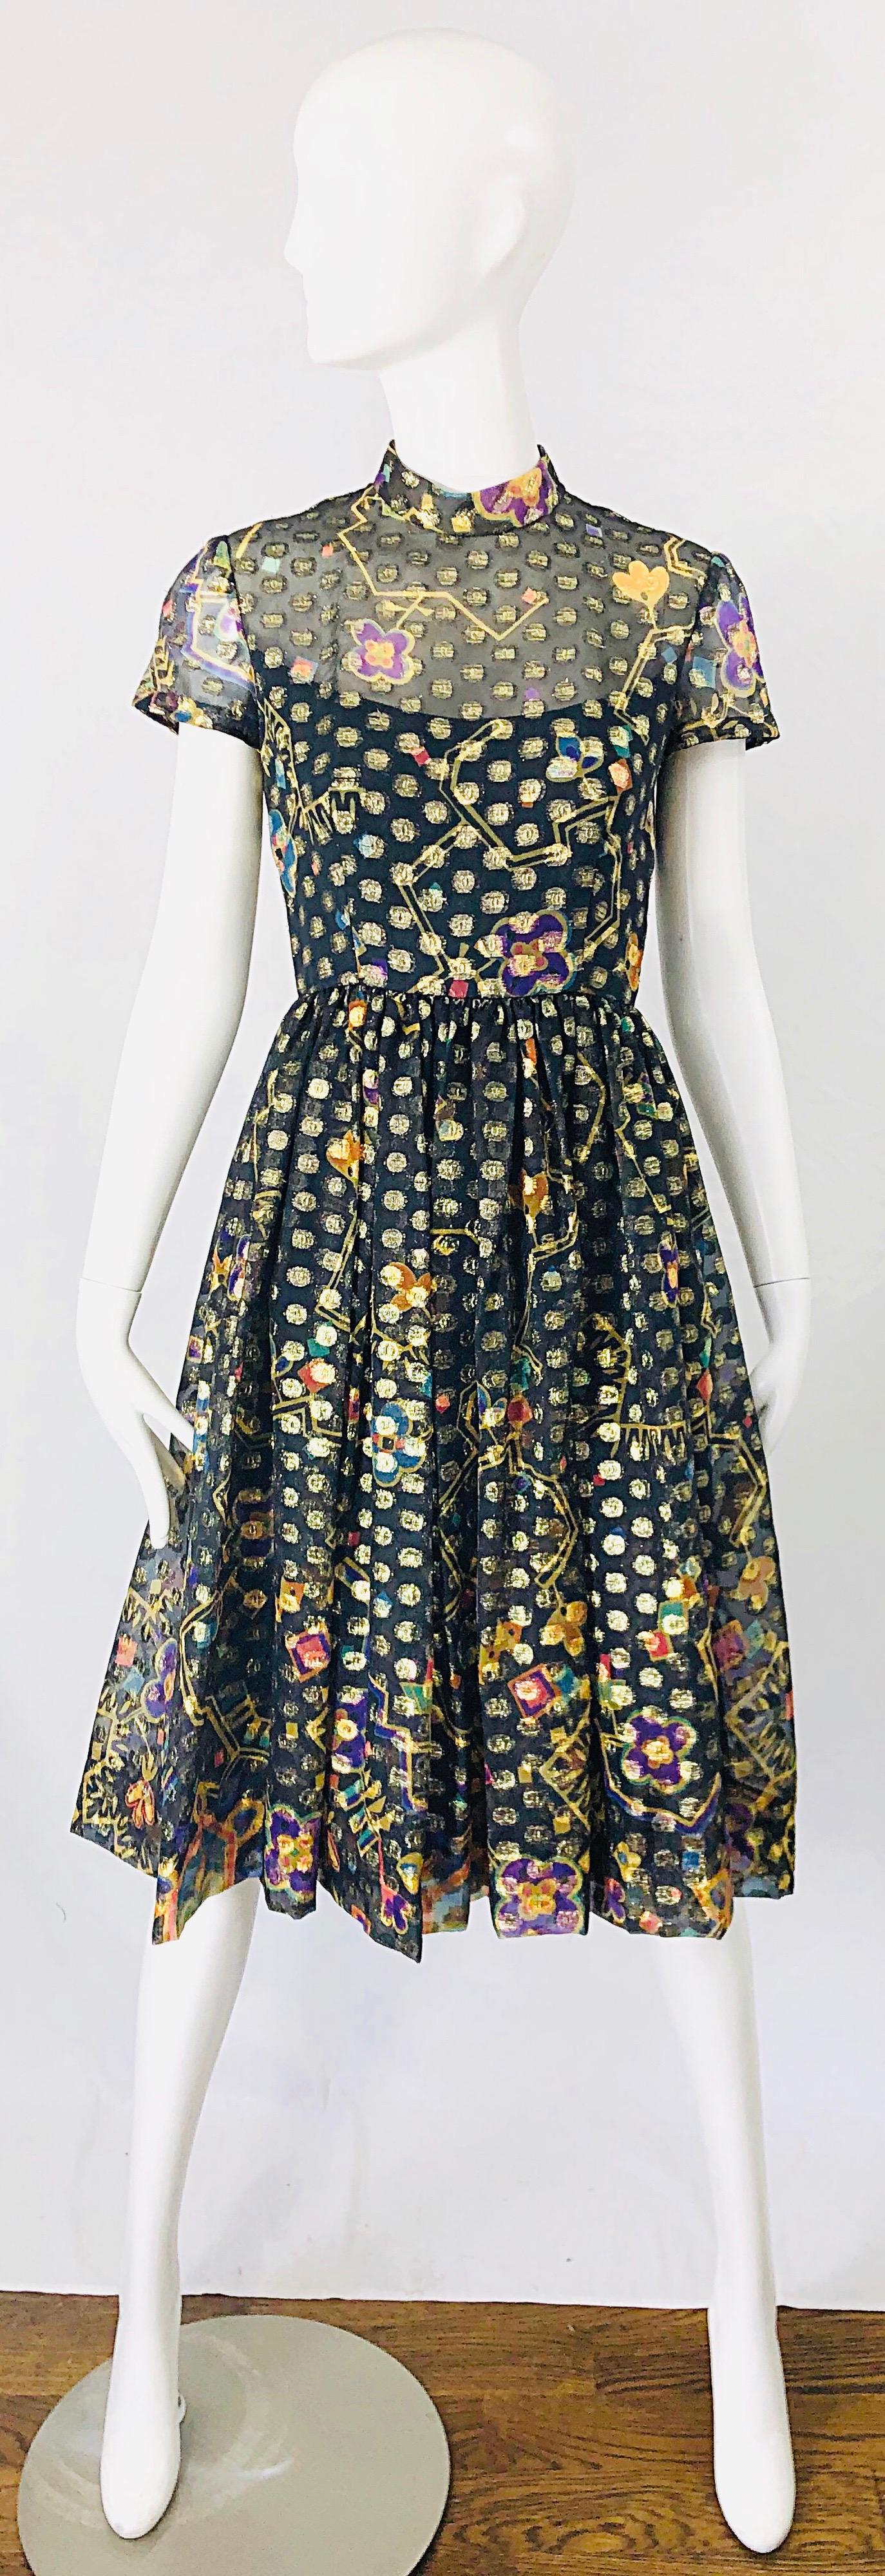 Beautiful late 1960s GEORGE HALLEY silk chiffon short sleeve dress ! Features a chiffon overlay with gold lurex polka dots throughout.Brightly colored flowers in purple, yellow, orange, pink, green, turquoise blue throughout. Full metal zipper up